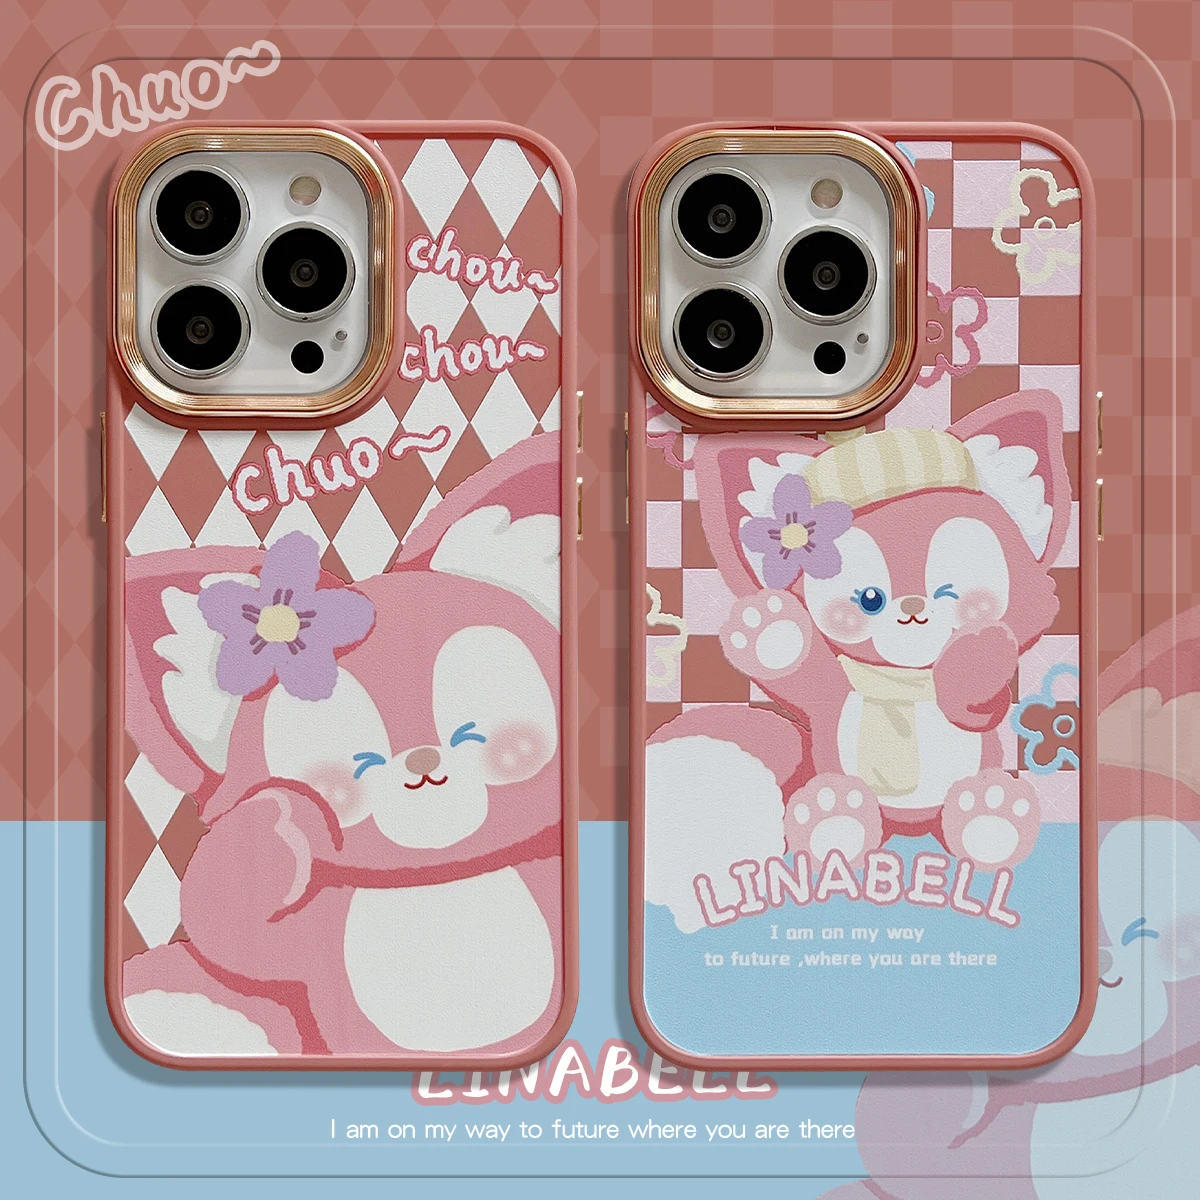 

Cute Cartoon Lens Painted Electroplating Skin Sensation Plaid LinaBell Fox Phone Case For iPhone11 12 13 ProMax XR Xsmax Cover